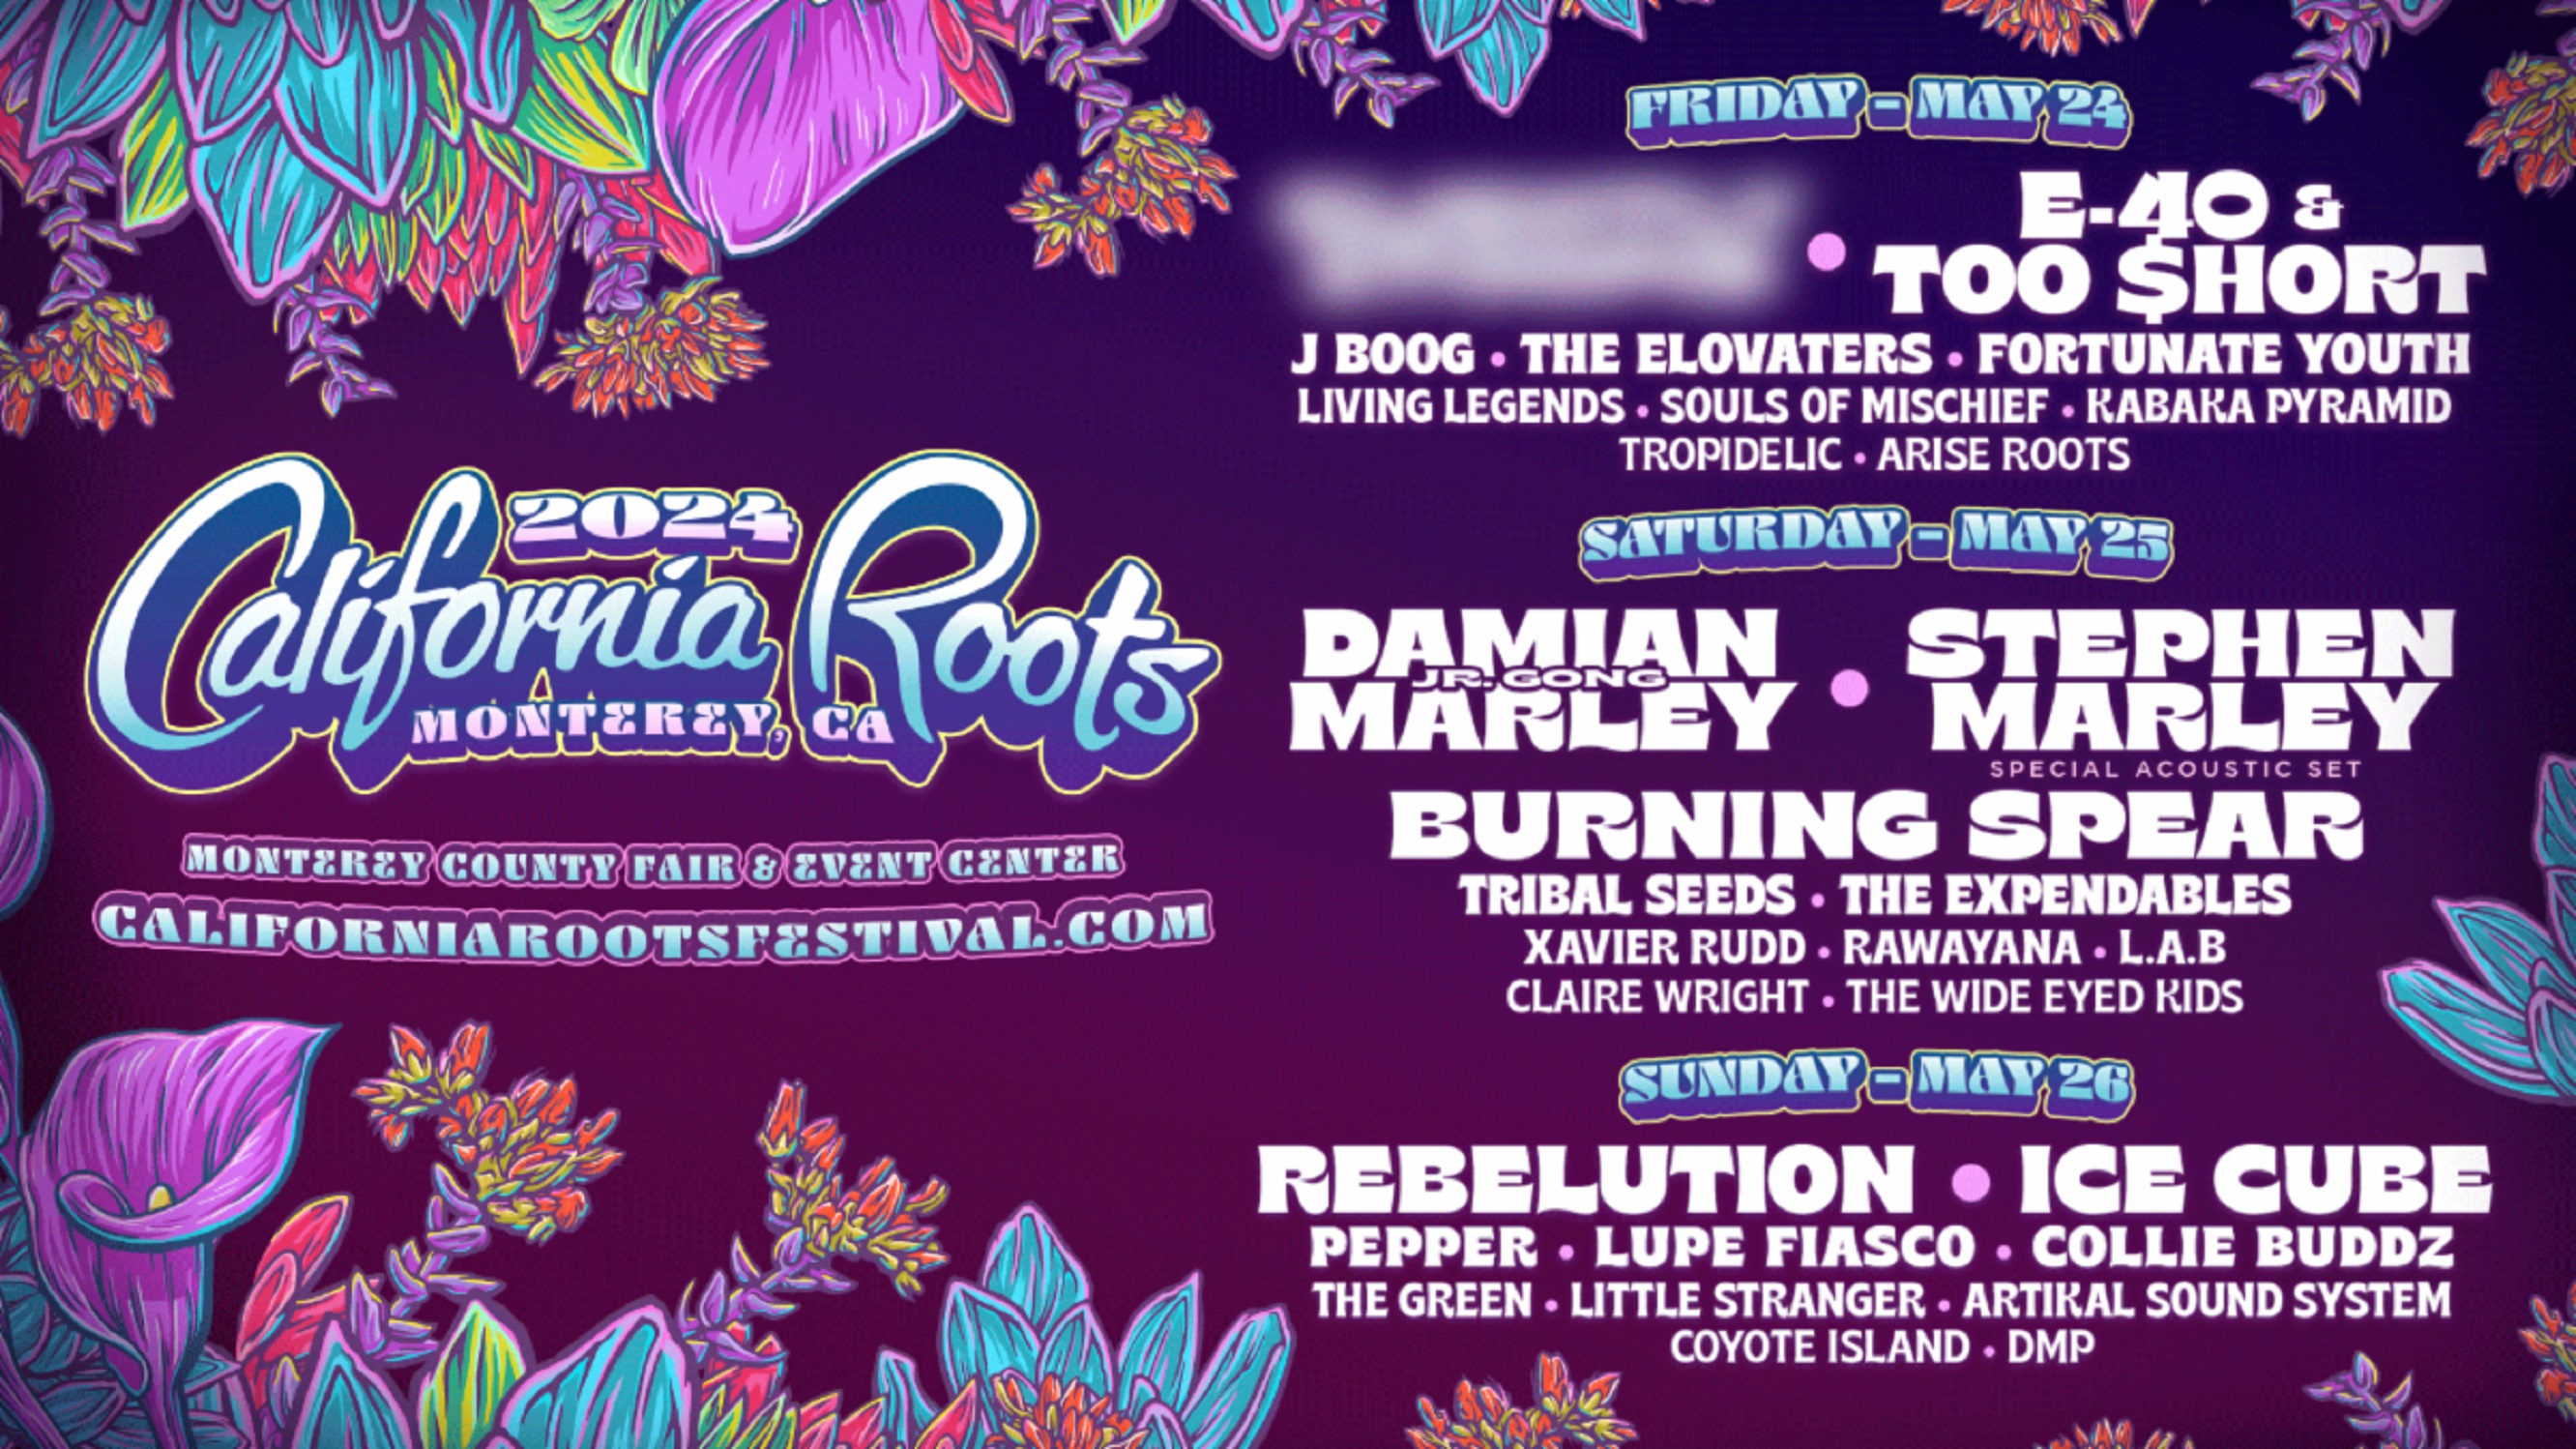 California Roots Music And Arts Festival Adds Stephen Marley, Ice Cube, E-40 and Too Short, And More To 2024 Lineup